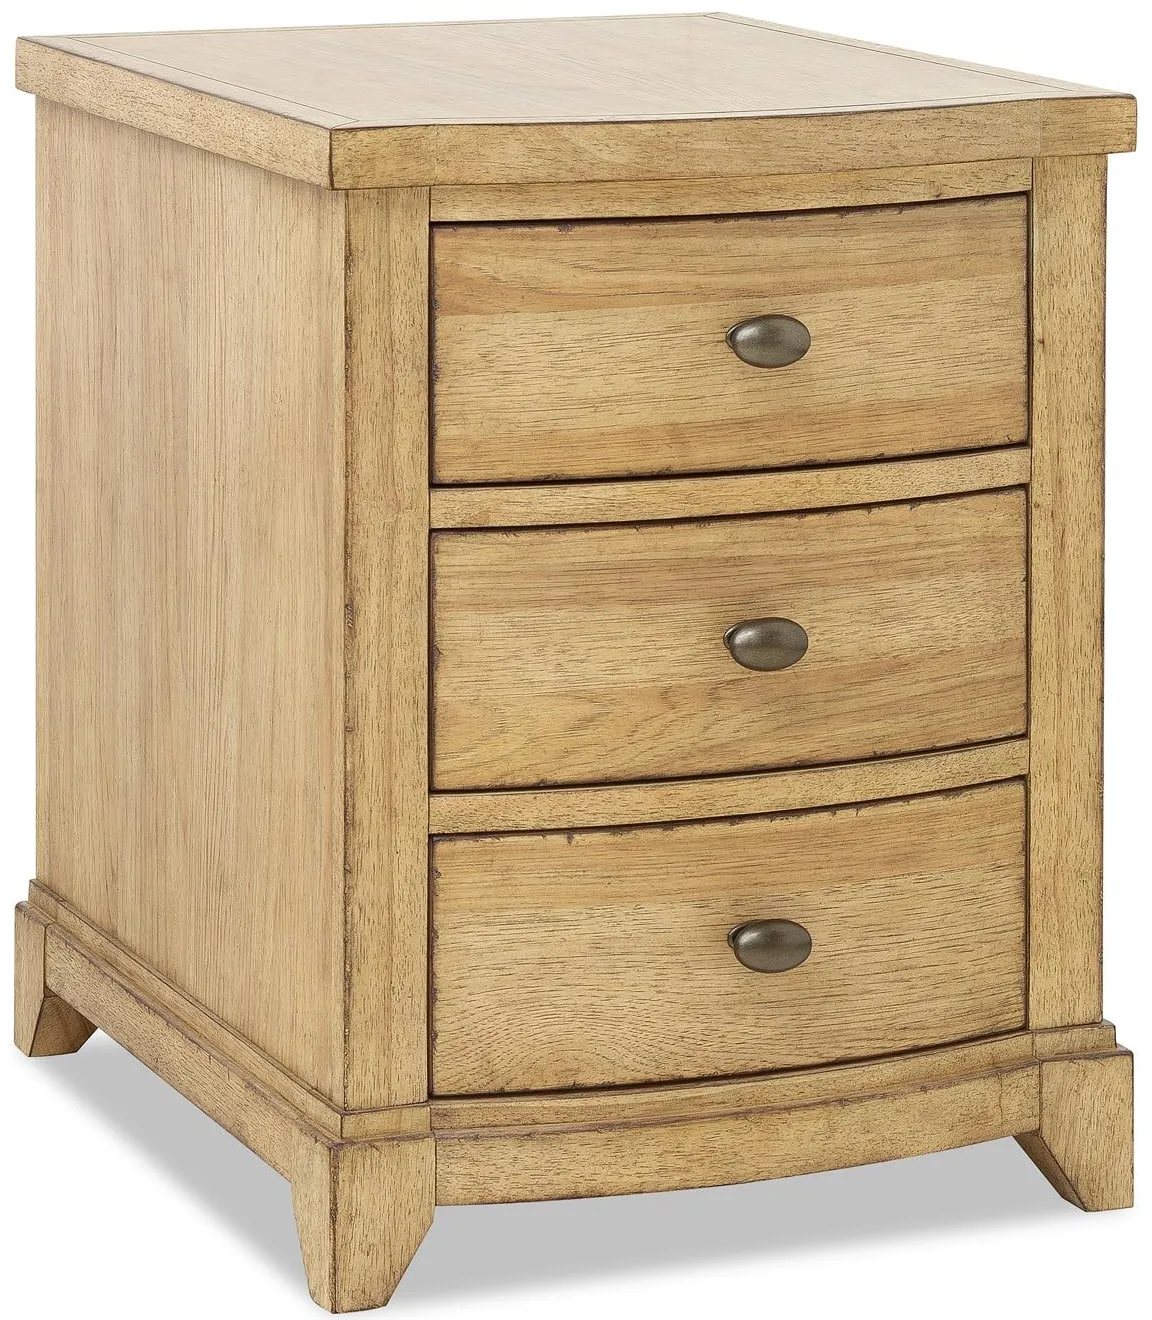 Traditions Hickory Drawer Chairside Chest